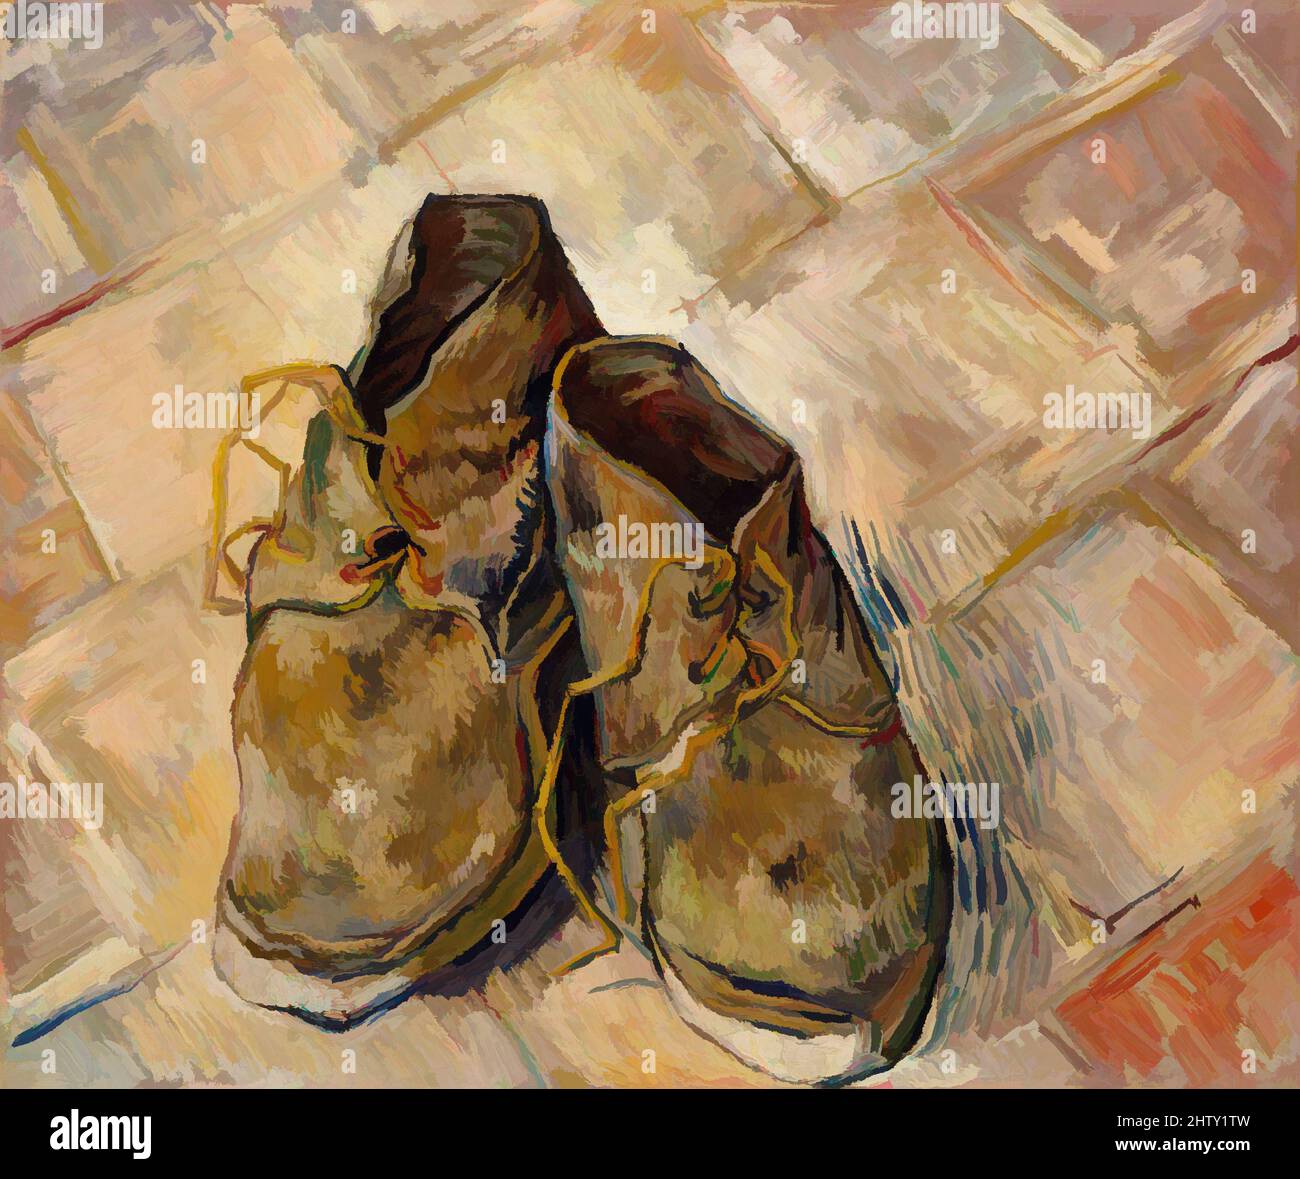 Art inspired by Shoes, 1888, Oil on canvas, 18 x 21 3/4 in. (45.7 x 55.2 cm), Paintings, Vincent van Gogh (Dutch, Zundert 1853–1890 Auvers-sur-Oise), Van Gogh painted several still lifes of shoes or boots during his Paris period. This picture, painted later, in Arles, evinces a unique, Classic works modernized by Artotop with a splash of modernity. Shapes, color and value, eye-catching visual impact on art. Emotions through freedom of artworks in a contemporary way. A timeless message pursuing a wildly creative new direction. Artists turning to the digital medium and creating the Artotop NFT Stock Photo